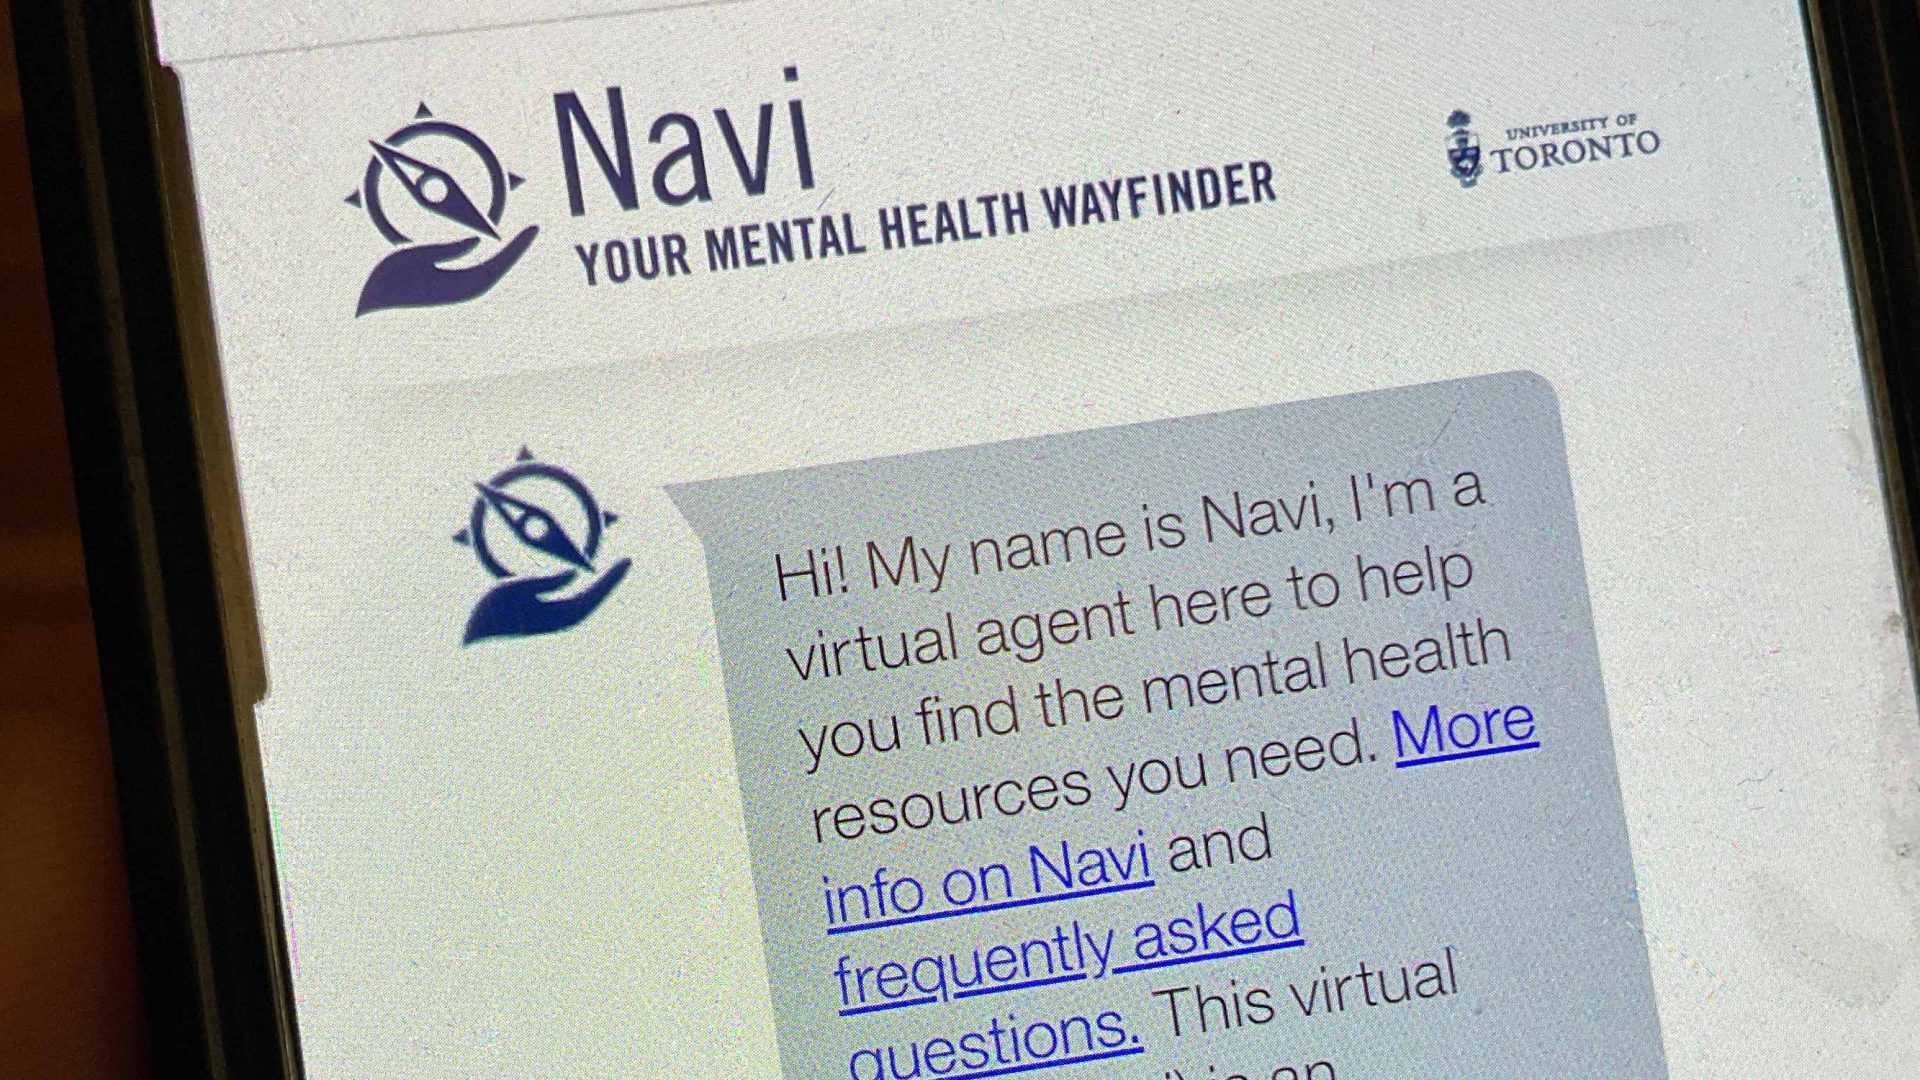 Navi tool being used on a phone